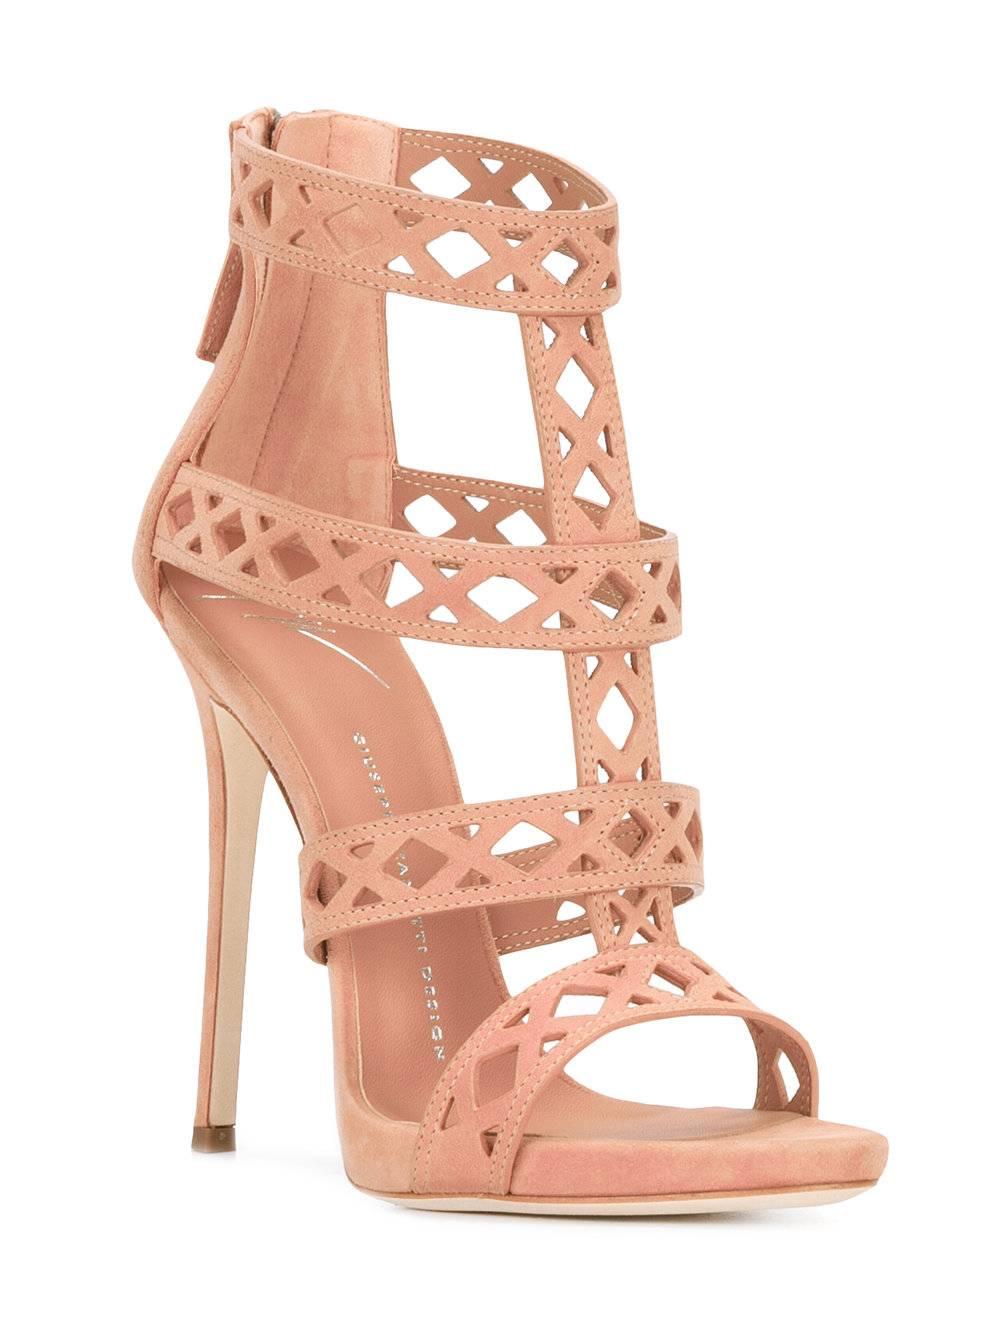 CURATOR'S NOTES

Giuseppe Zanotti New Blush Suede Cut Out Gladiator Sandals Heels in Box 

Size IT 36
Suede
Zipper back closure
Made in Italy
Heel height 5